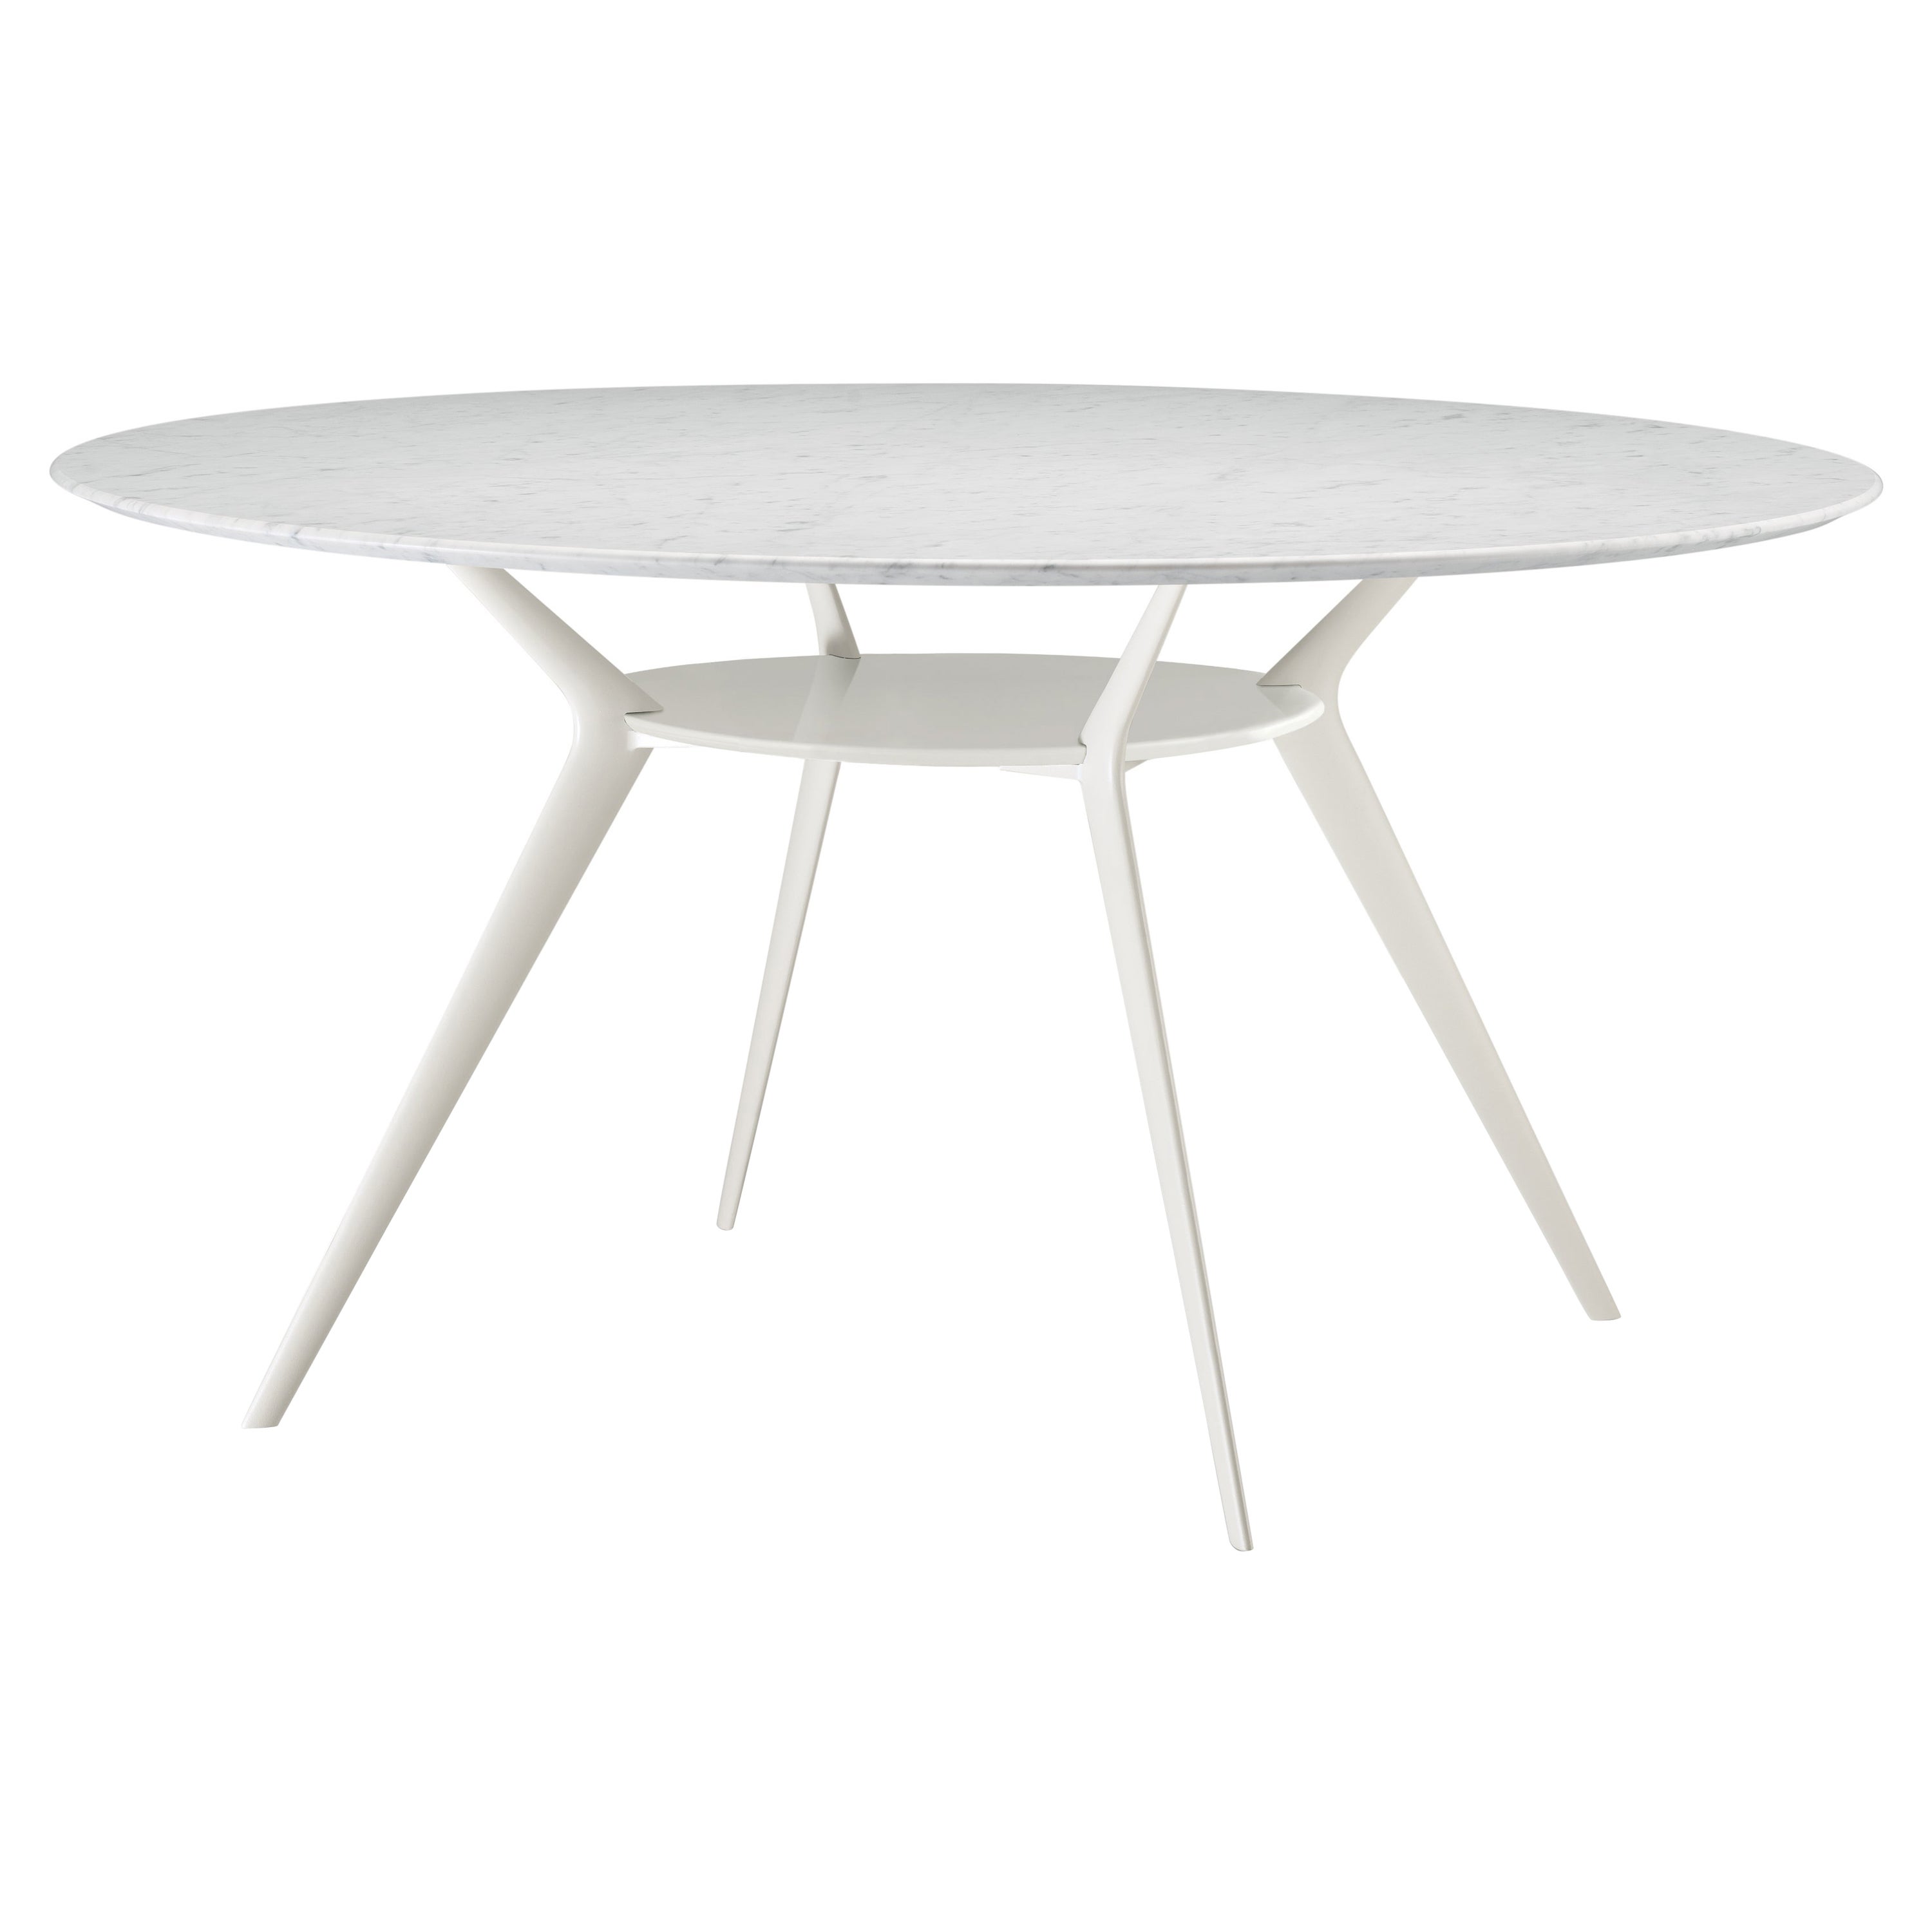 Alias Biplane 403 Table in Marble Top with White Lacquered Aluminium Frame